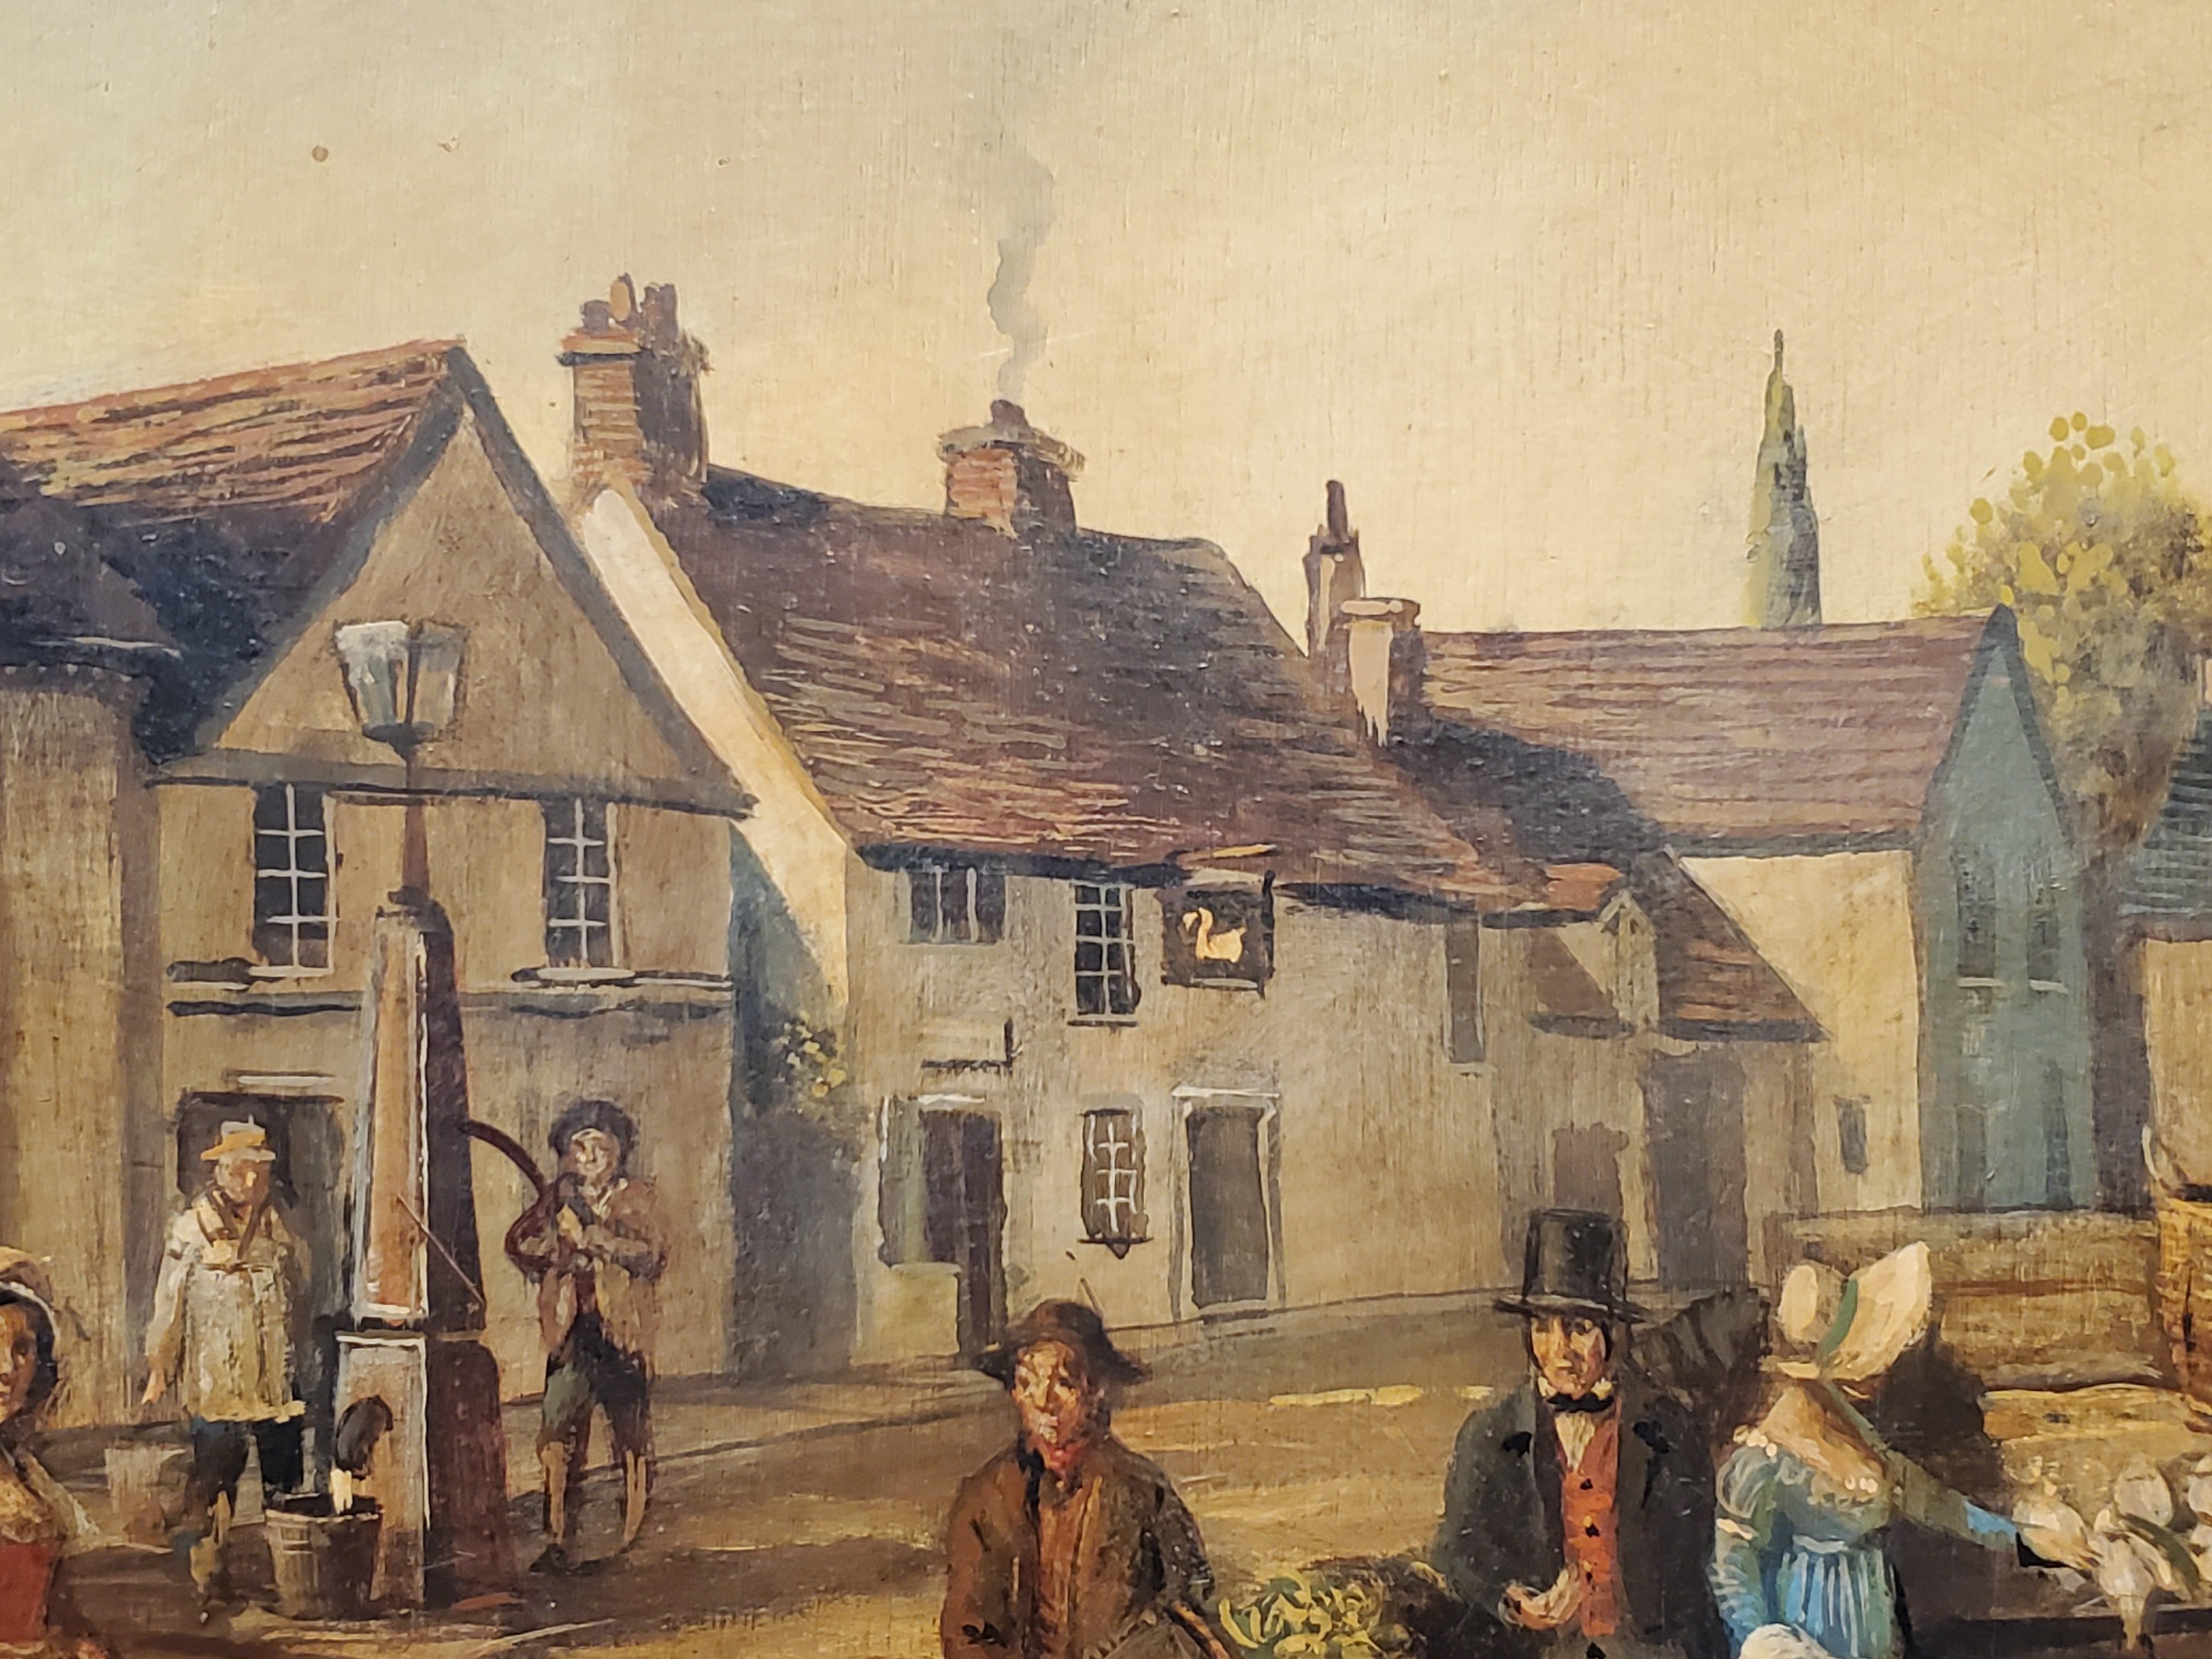 Emsworth Town Square Genre Painting  by Brian Coole 2